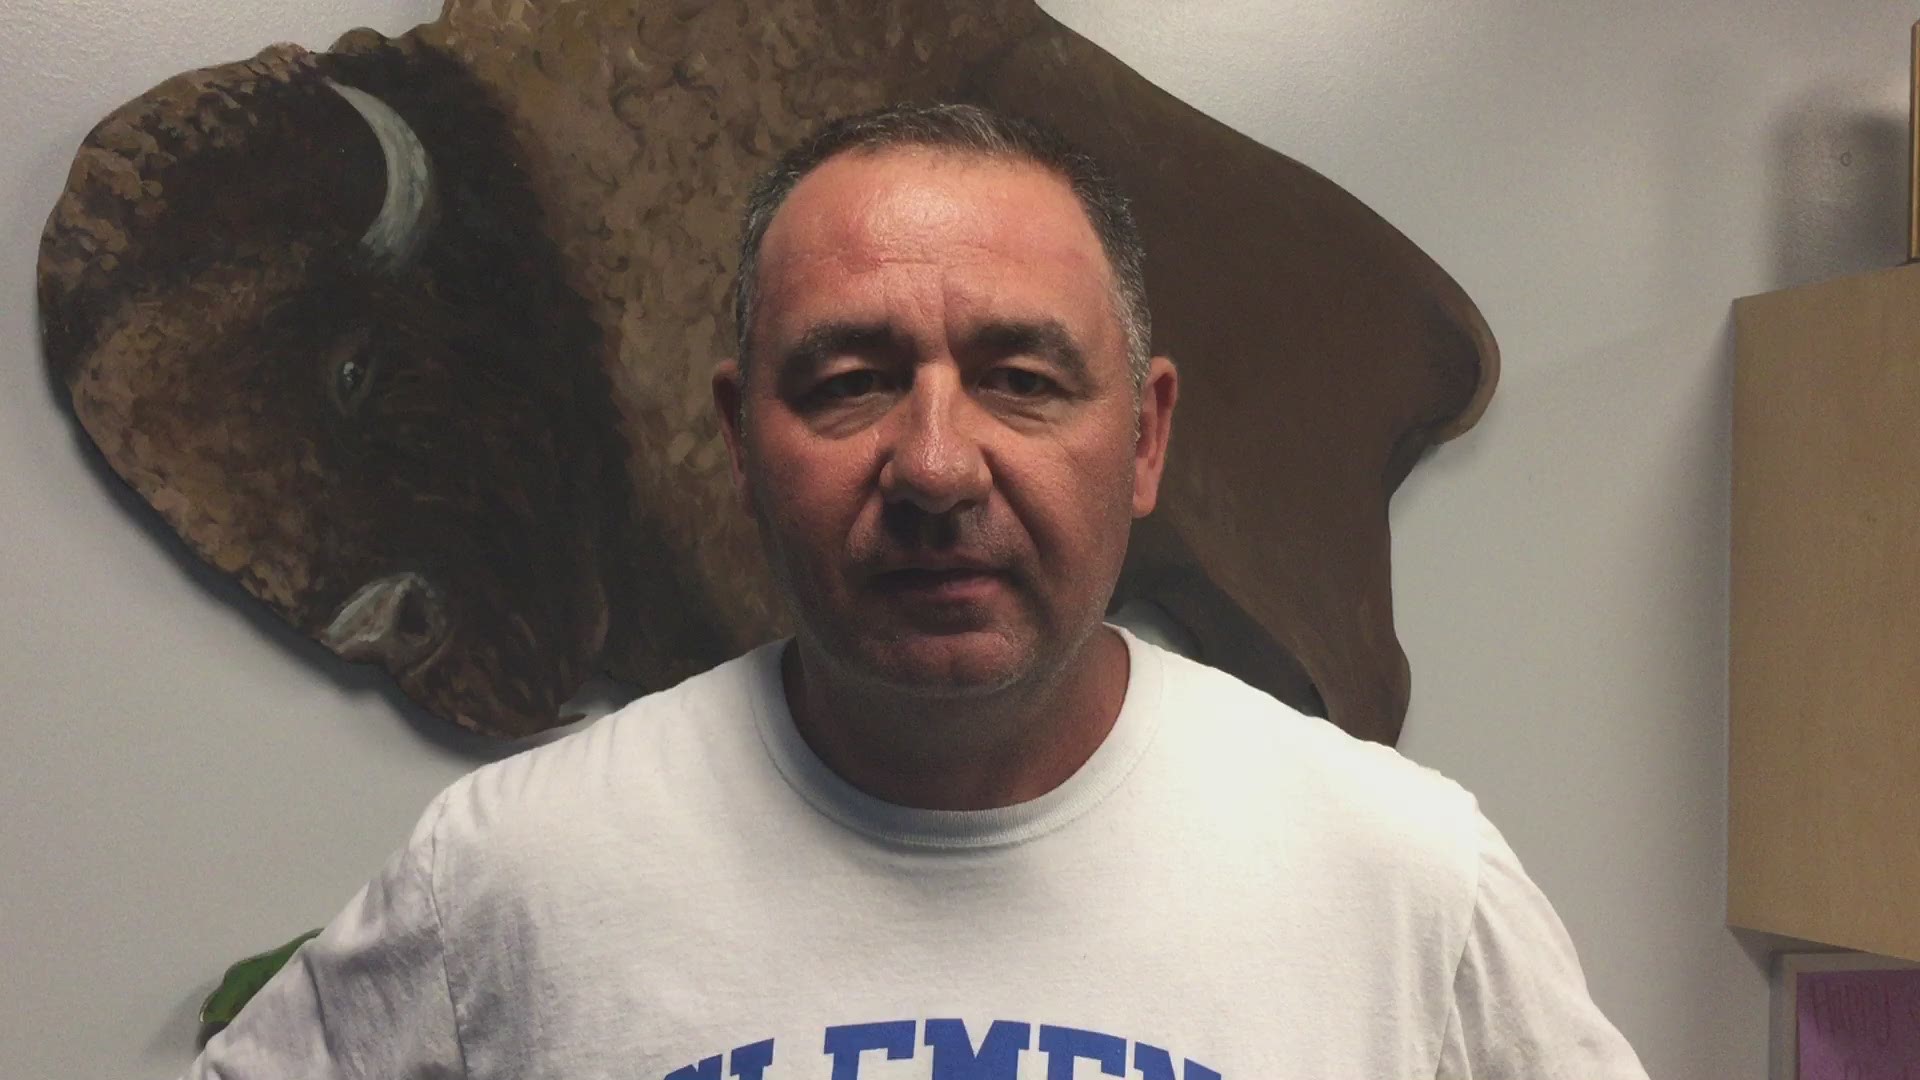 Clemens coach Jared Johnston on the quality of teams in District 27-6A